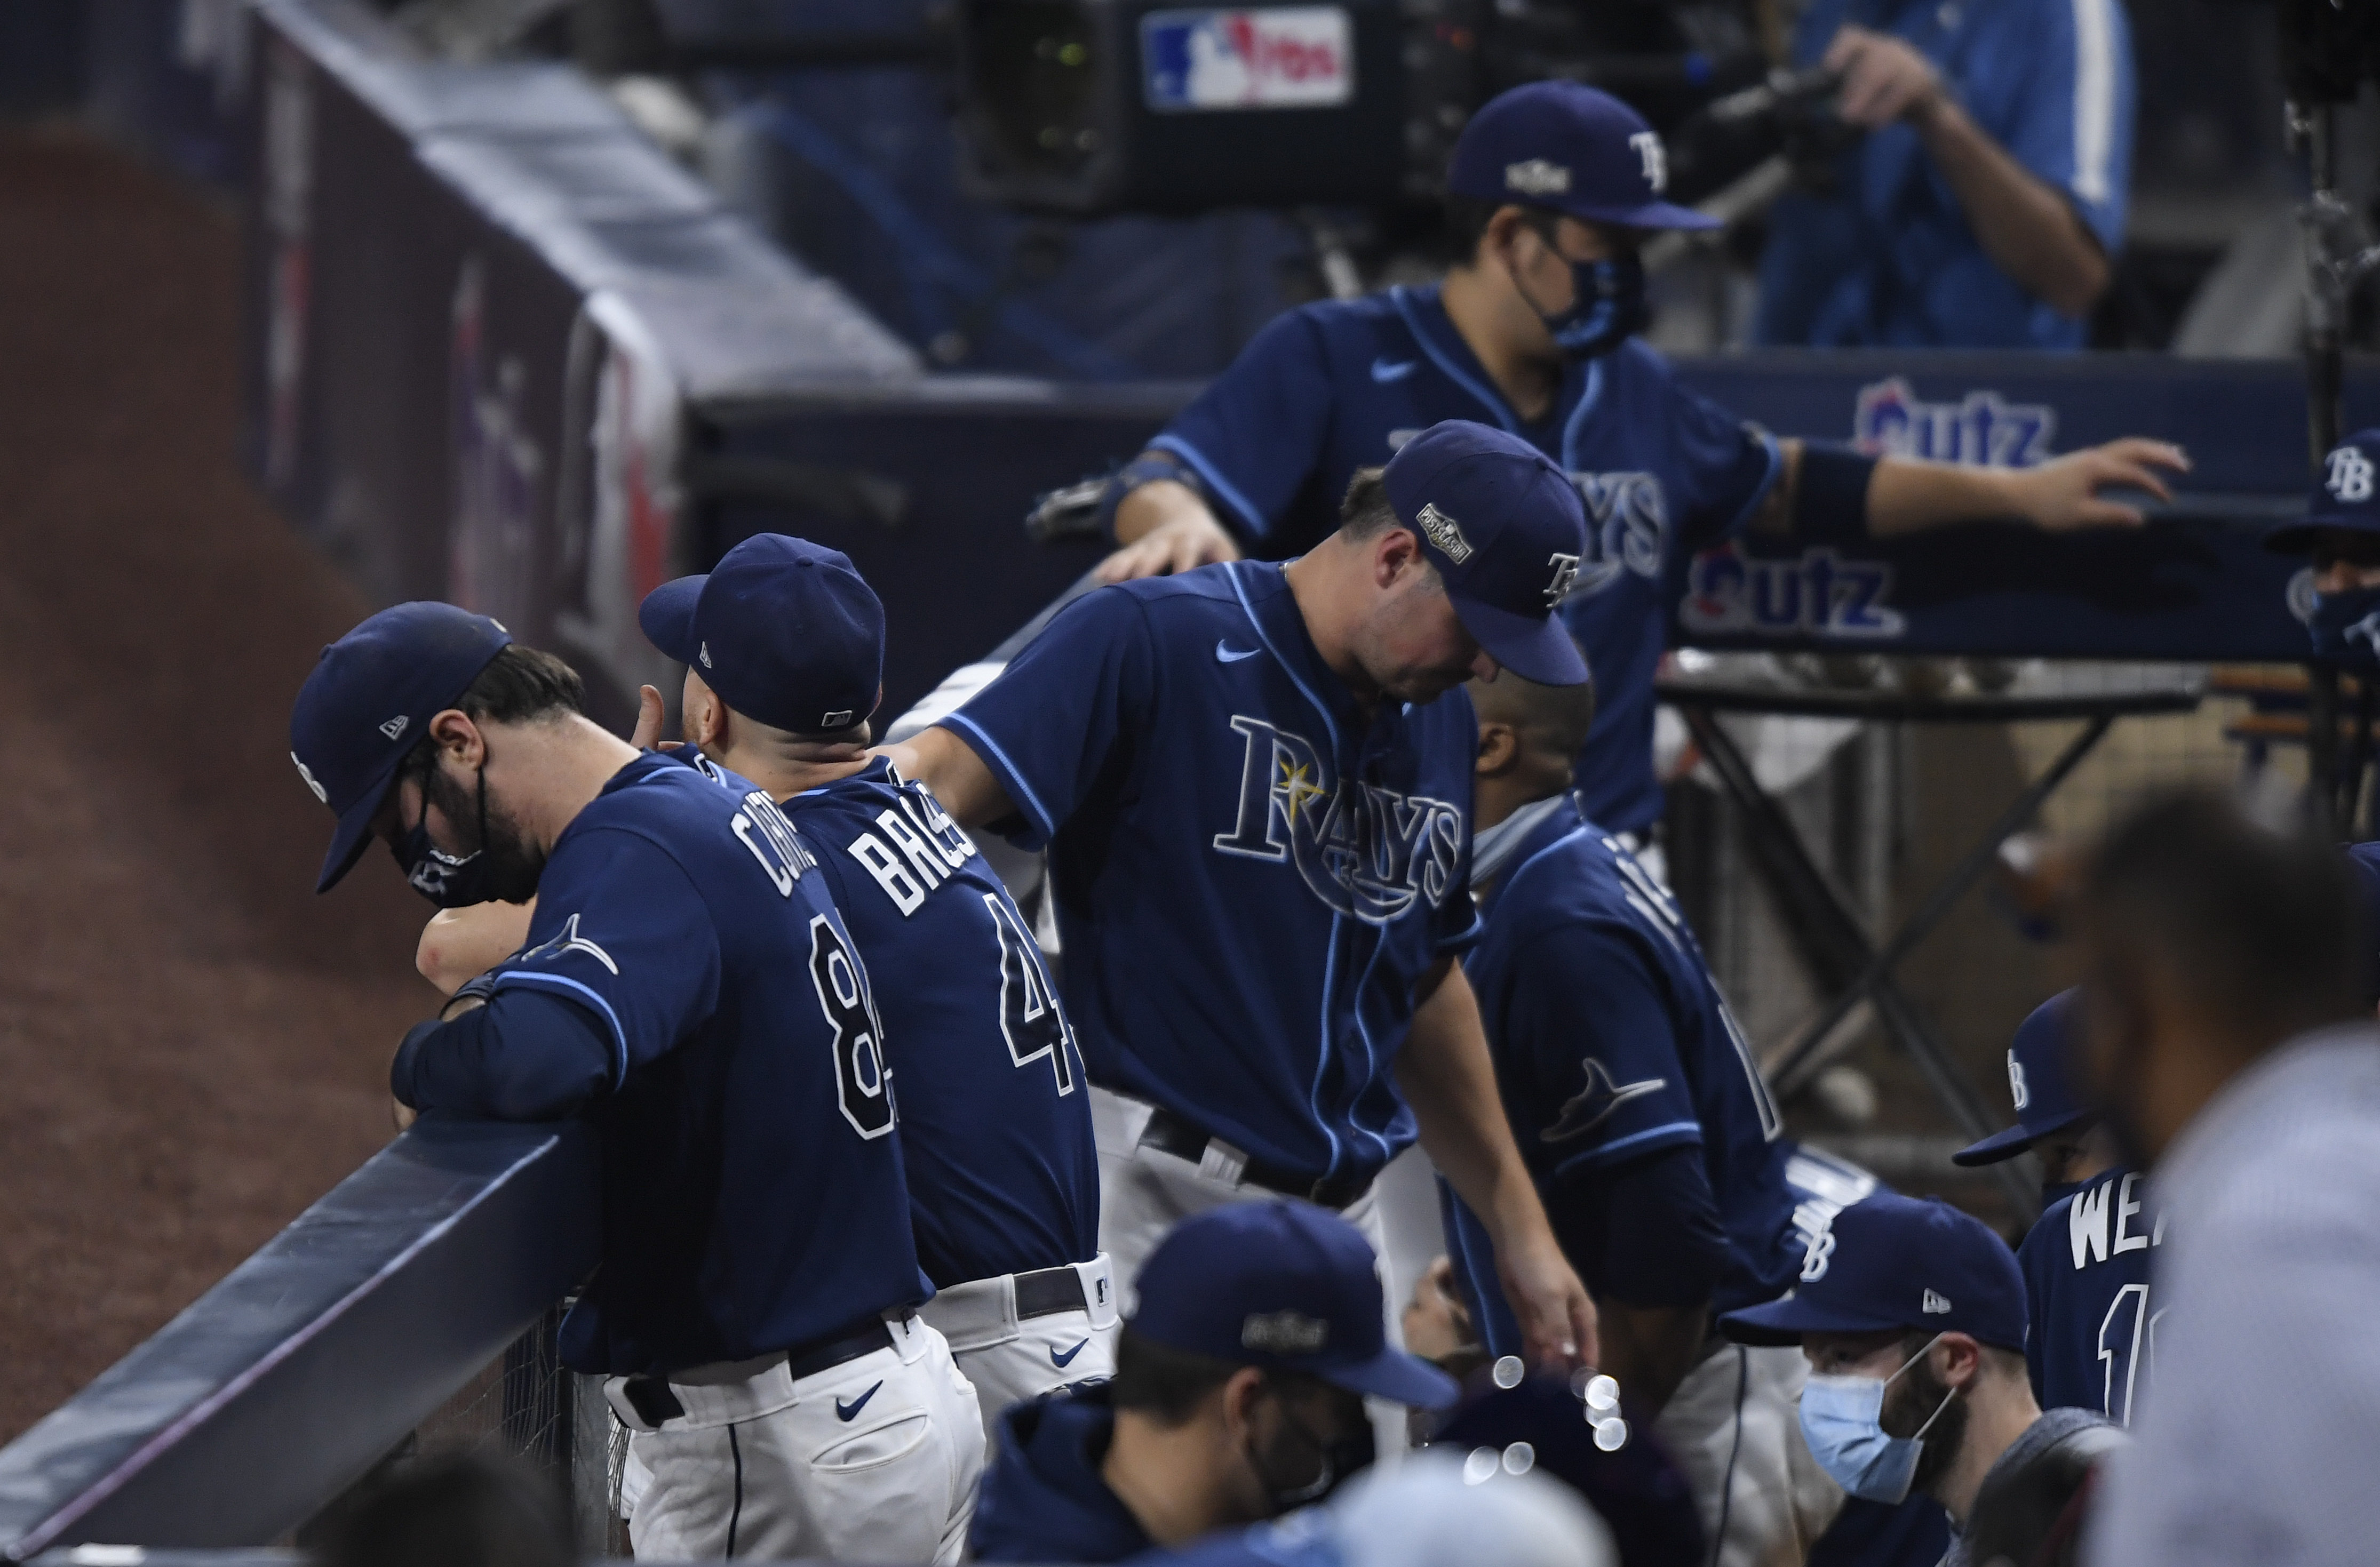 Yankees Power Way to 9-3 Win Against Rays in ALDS Opener